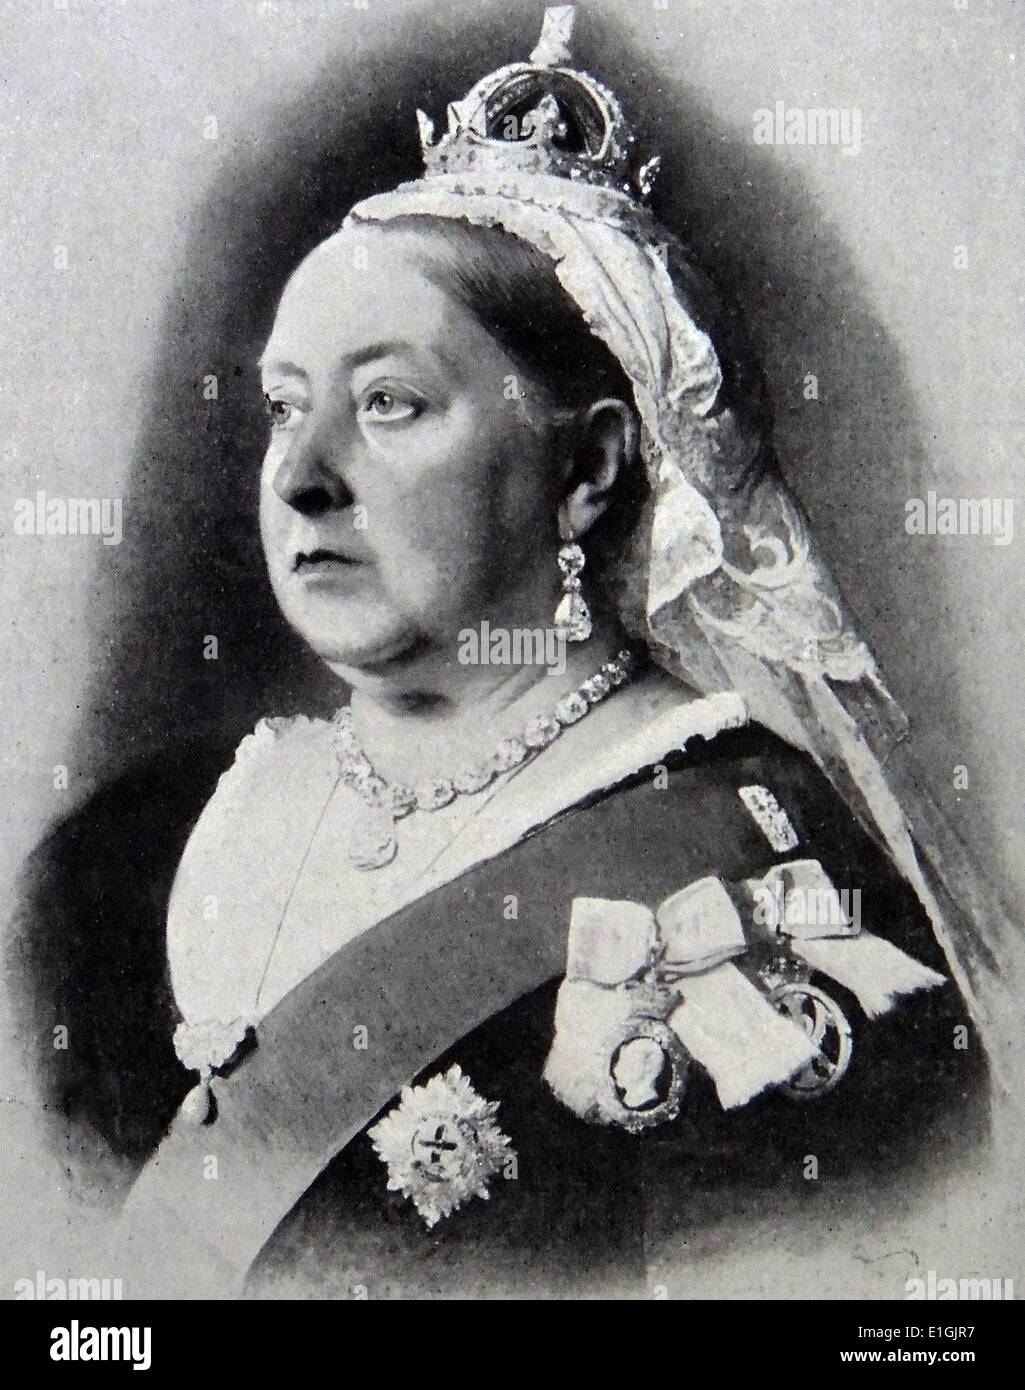 Queen Victoria (Alexandrina Victoria; 24 May 1819 – 22 January 1901) was the monarch of the United Kingdom of Great Britain and Ireland from 20 June 1837 until her death. From 1 May 1876, she used the additional title of Empress of India. Stock Photo